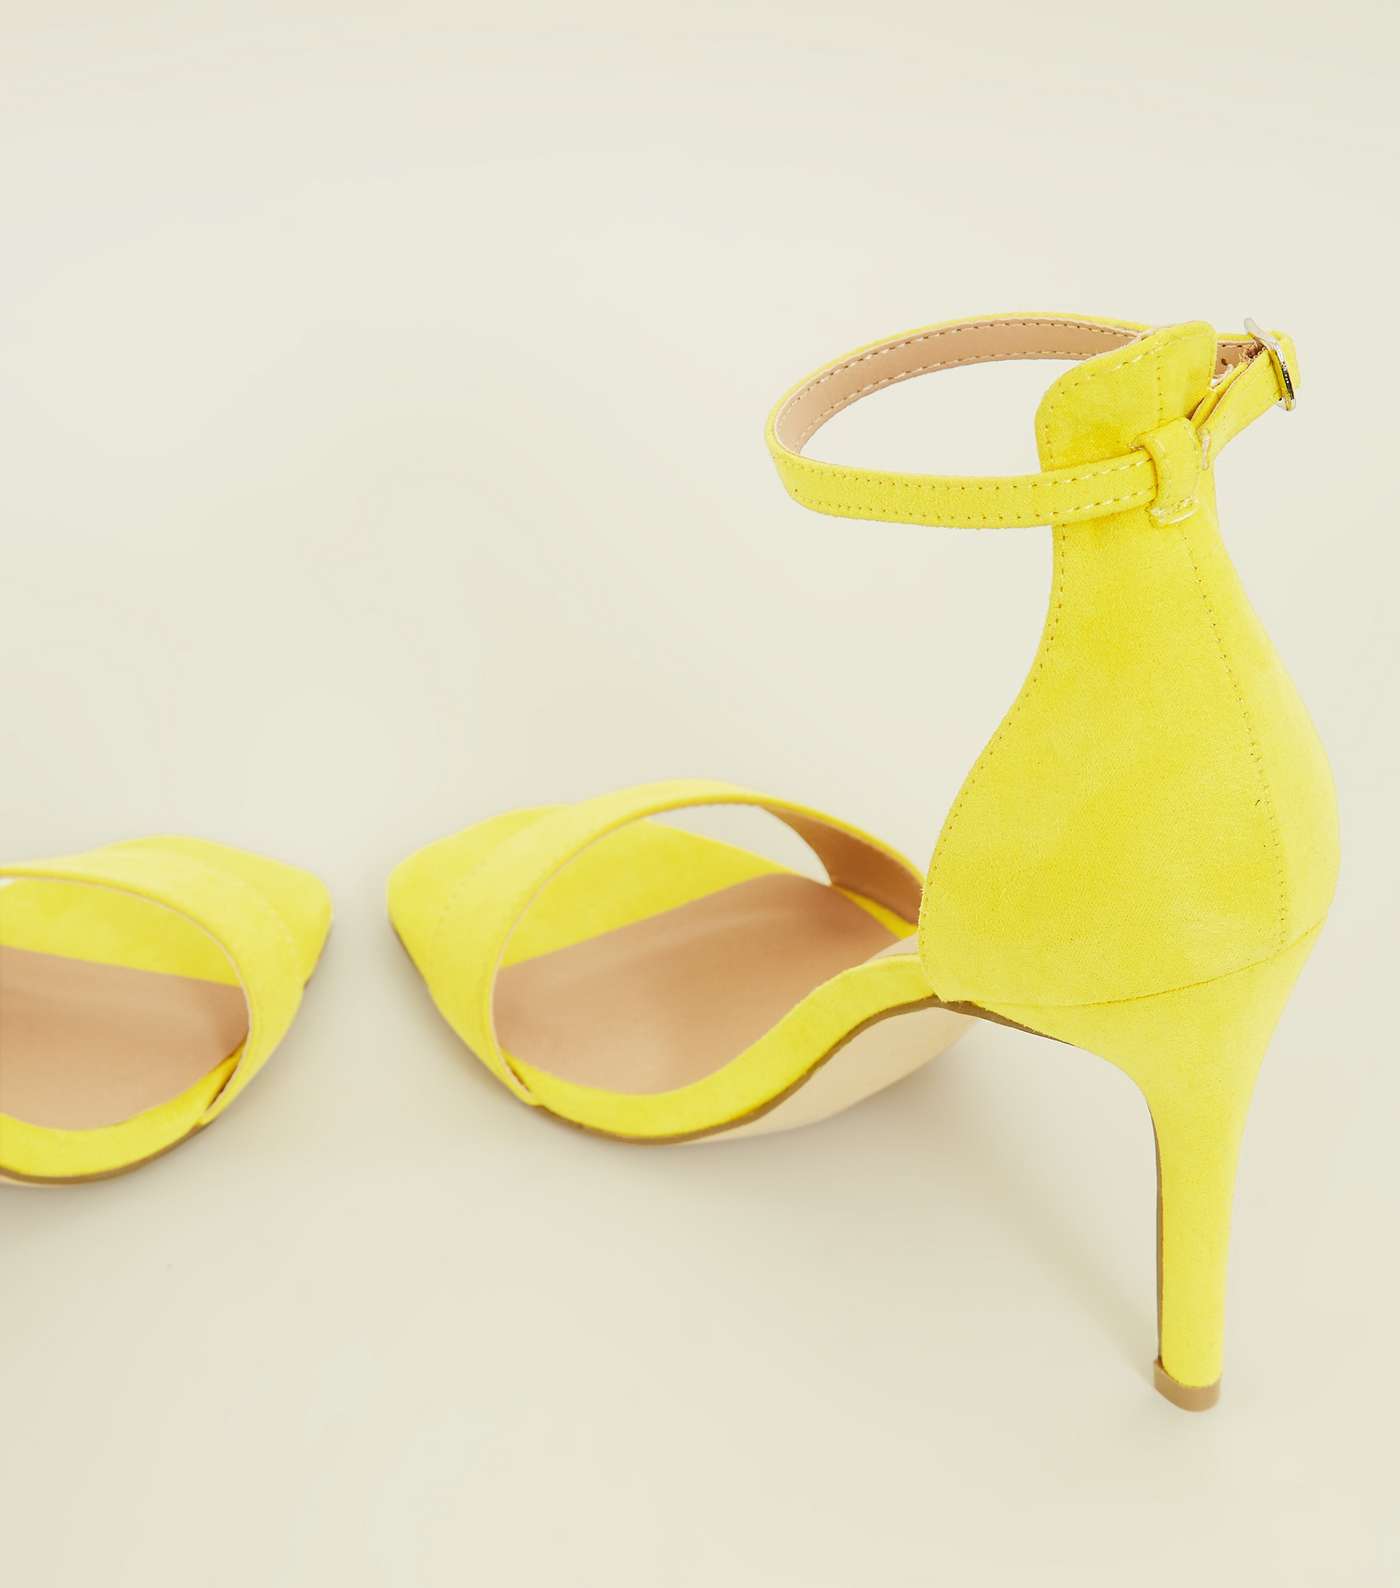 Yellow Suedette Square Toe Two Part Sandals Image 4